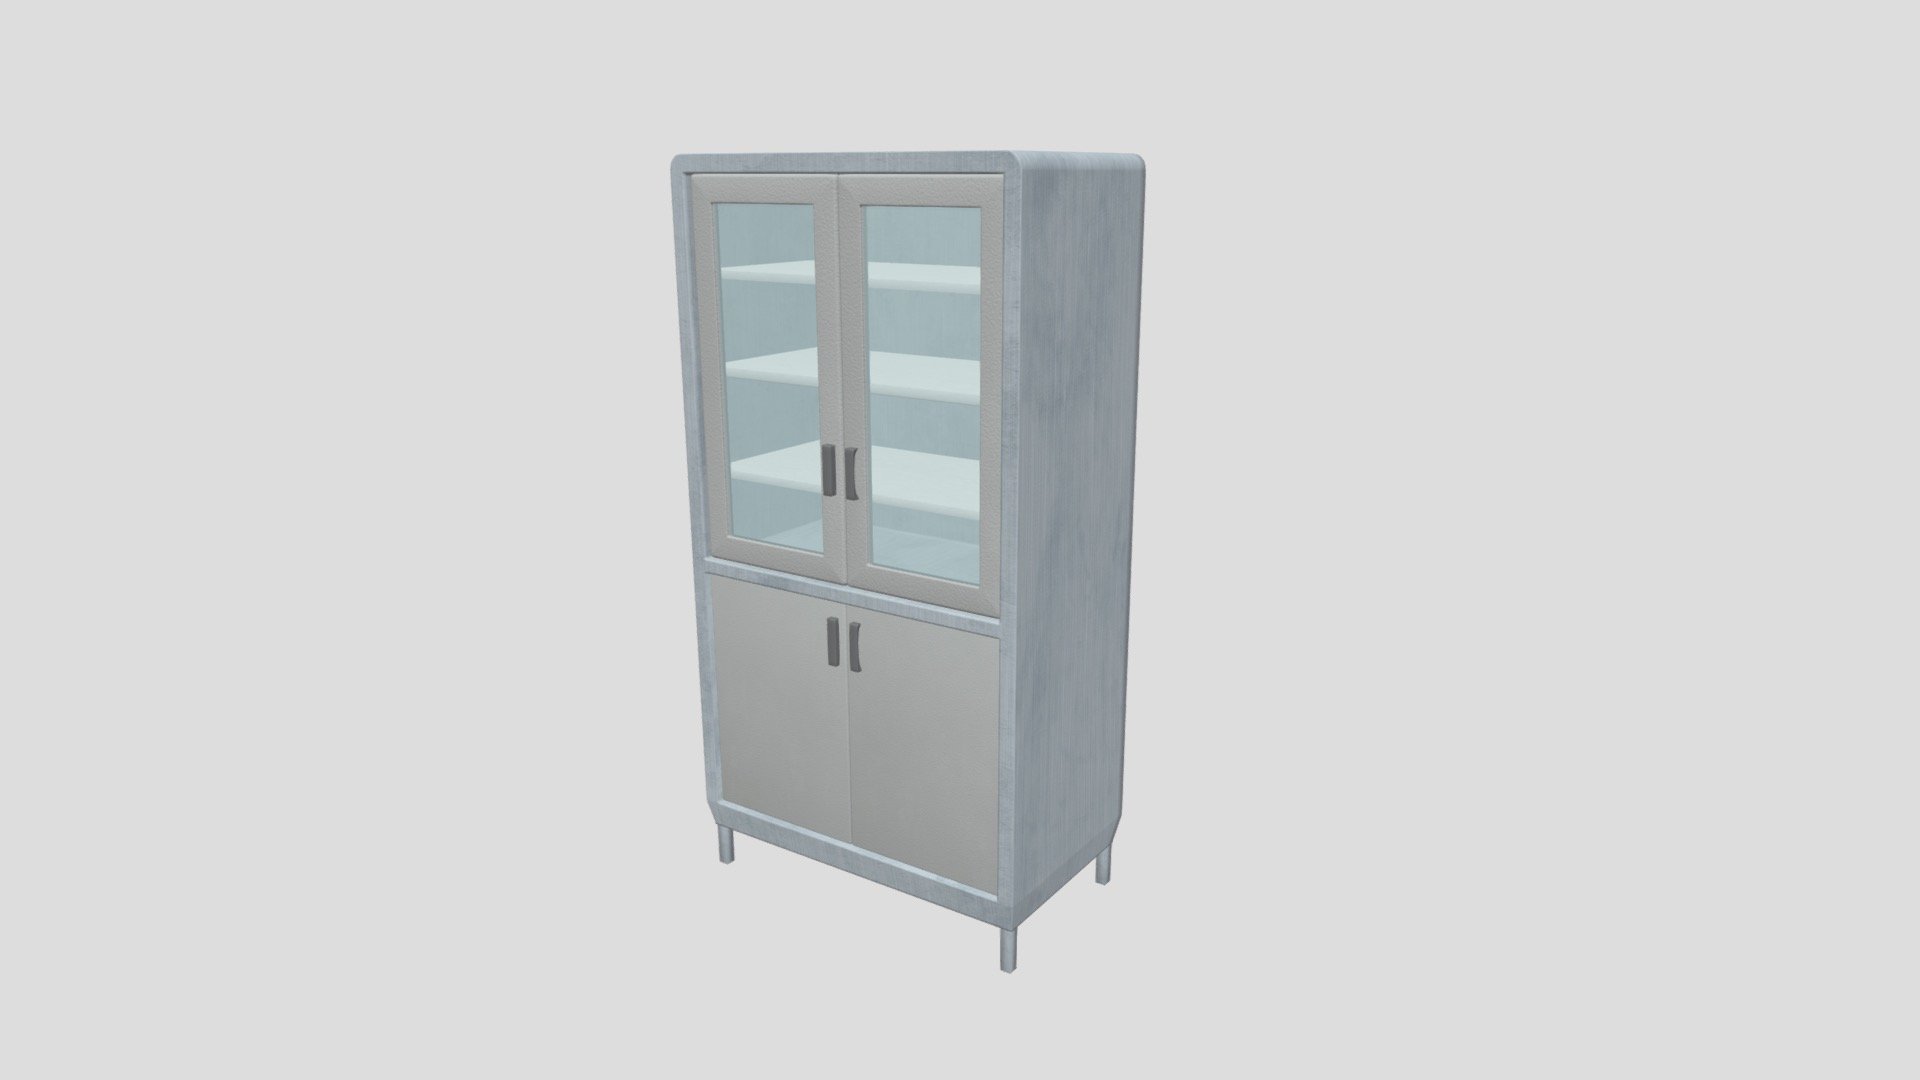 Textures: 2048 x 2048, Six colors on texture: Blue, brown, white, grey, light grey colors.

Has Normal Map: 2048 x 2048.

Rigged.

Materials: 5 - Metal, Wood, Plastic, Handle, Glass.

Smooth shaded.

Mirrored.

Subdivision Level: 1

Origin located on bottom-center.

Polygons: 12684

Vertices: 6382

Formats: Fbx, Obj, Stl, Dae.

I hope you enjoy the model! - Medical Cabinet - Buy Royalty Free 3D model by ED+ (@EDplus) 3d model